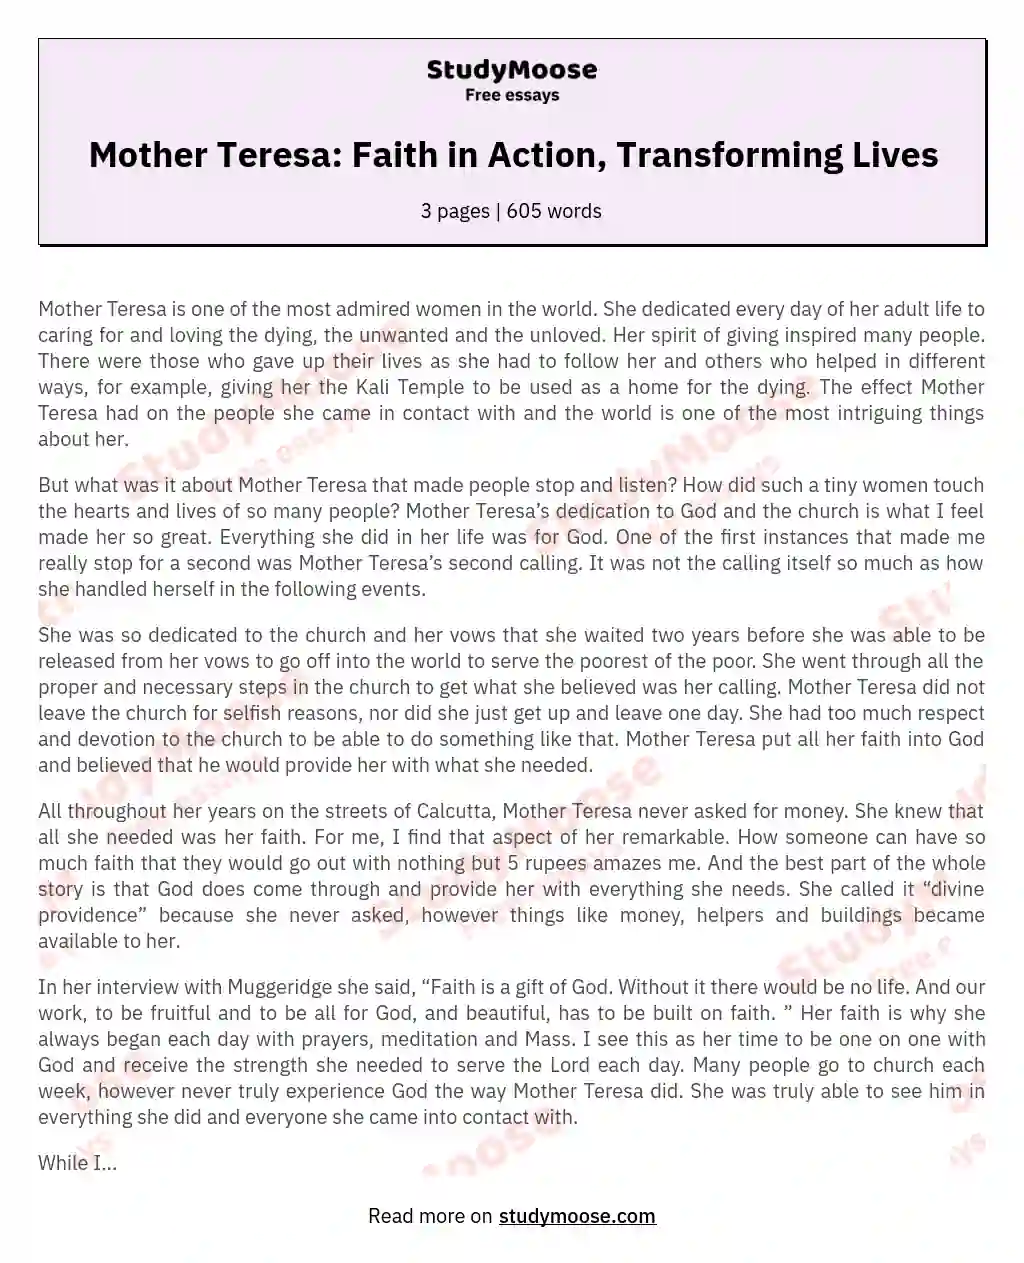 Mother Teresa: Faith in Action, Transforming Lives essay